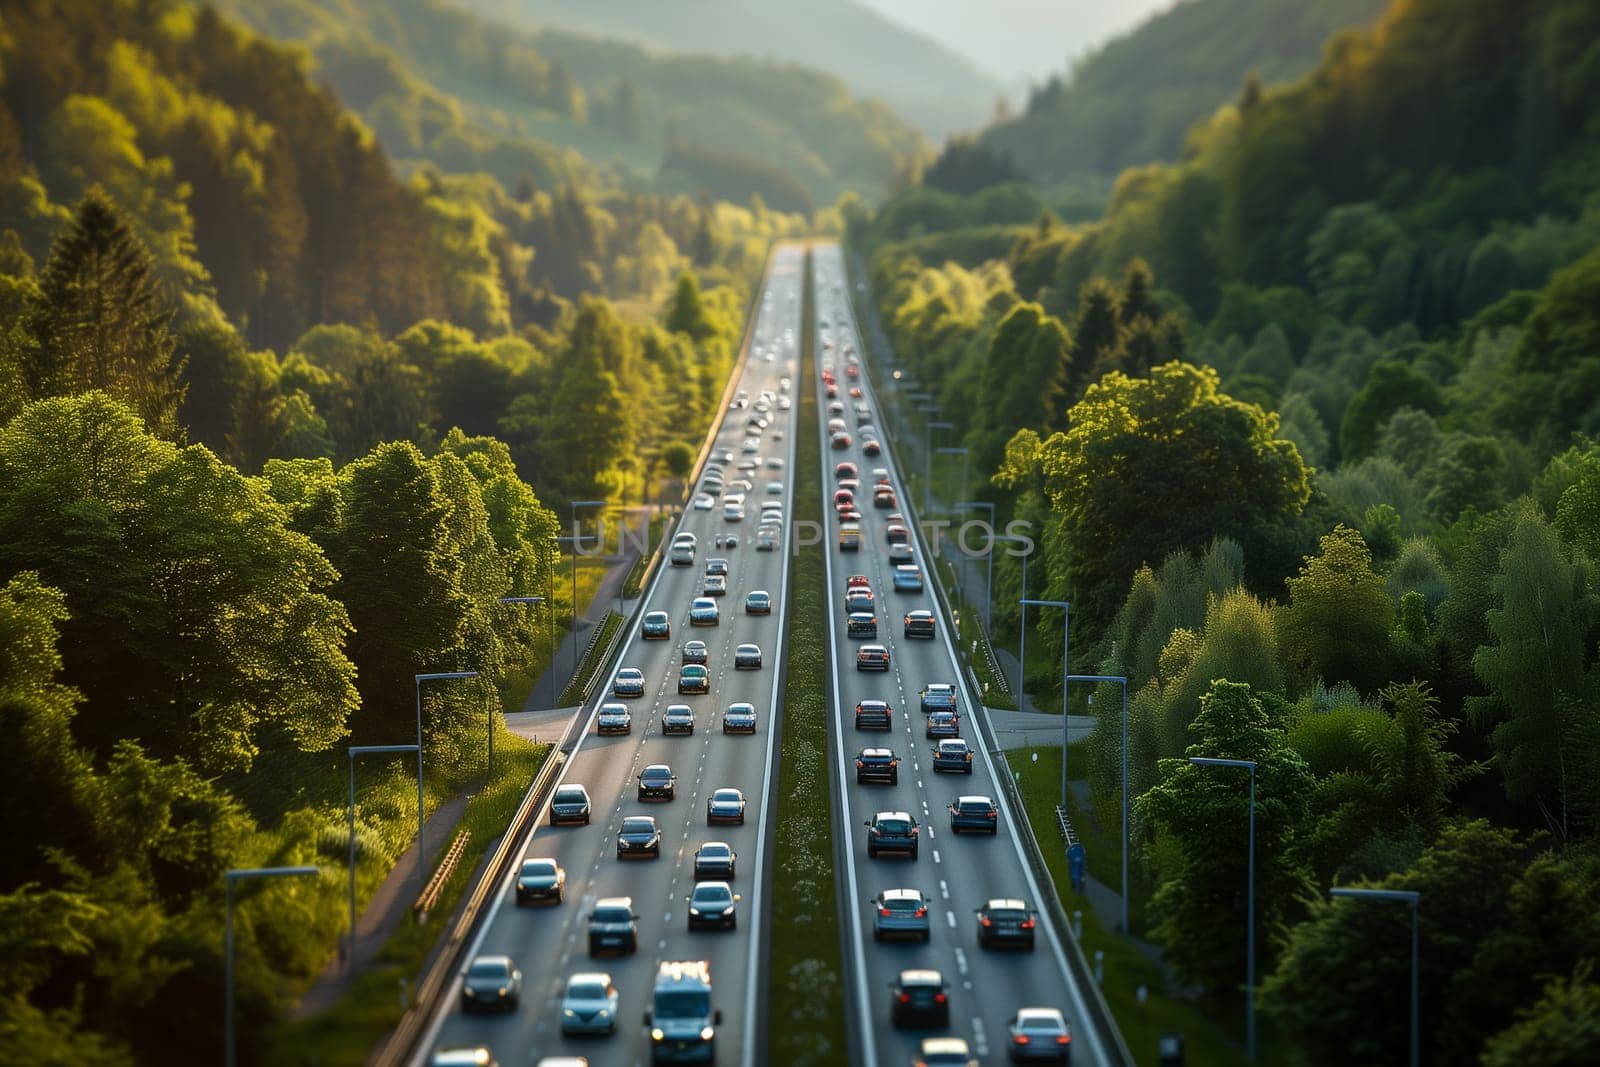 A birds eye view of a highway slicing through a dense forest, surrounded by lush greenery and tall trees.